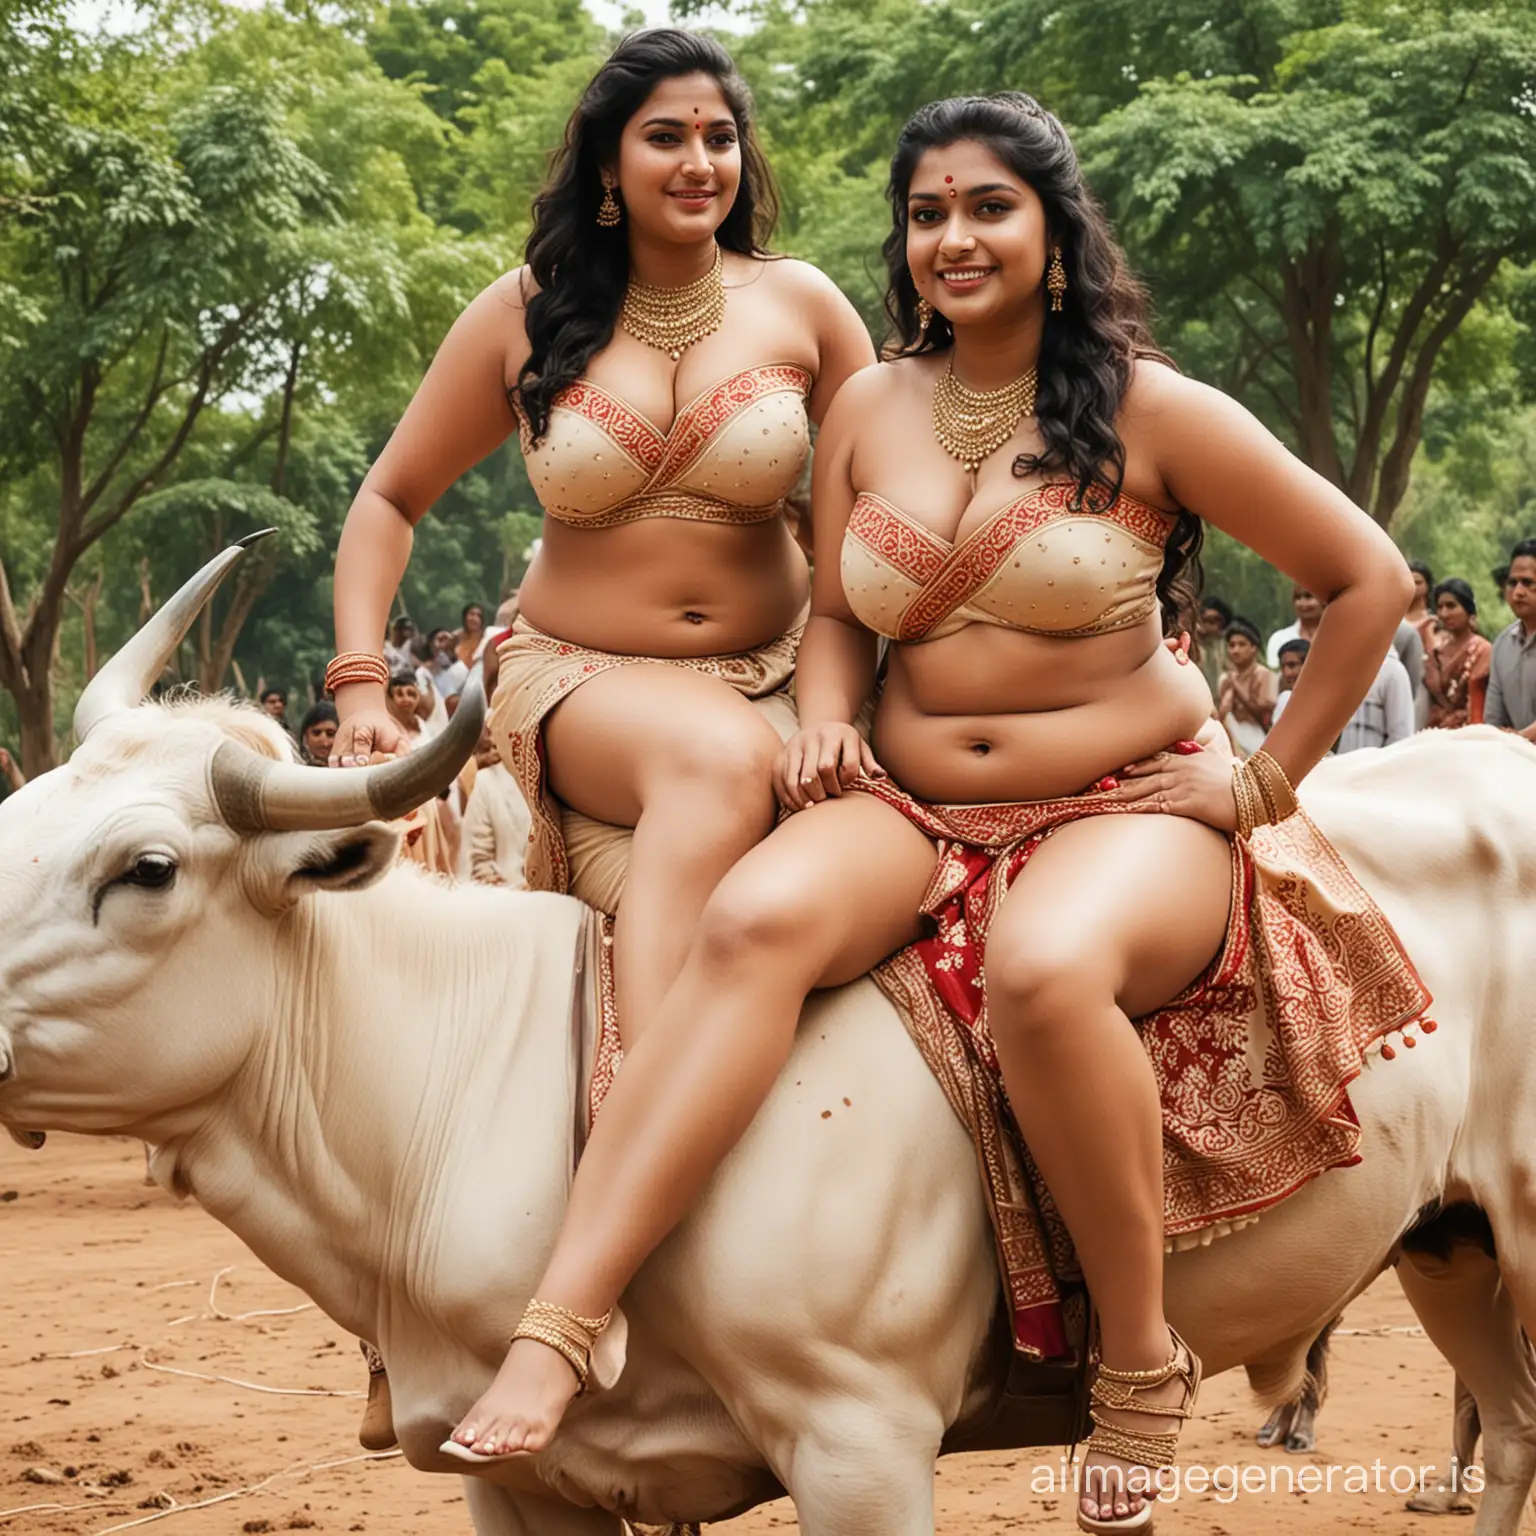 Fully nude beautiful plus size Indian brides riding bulls